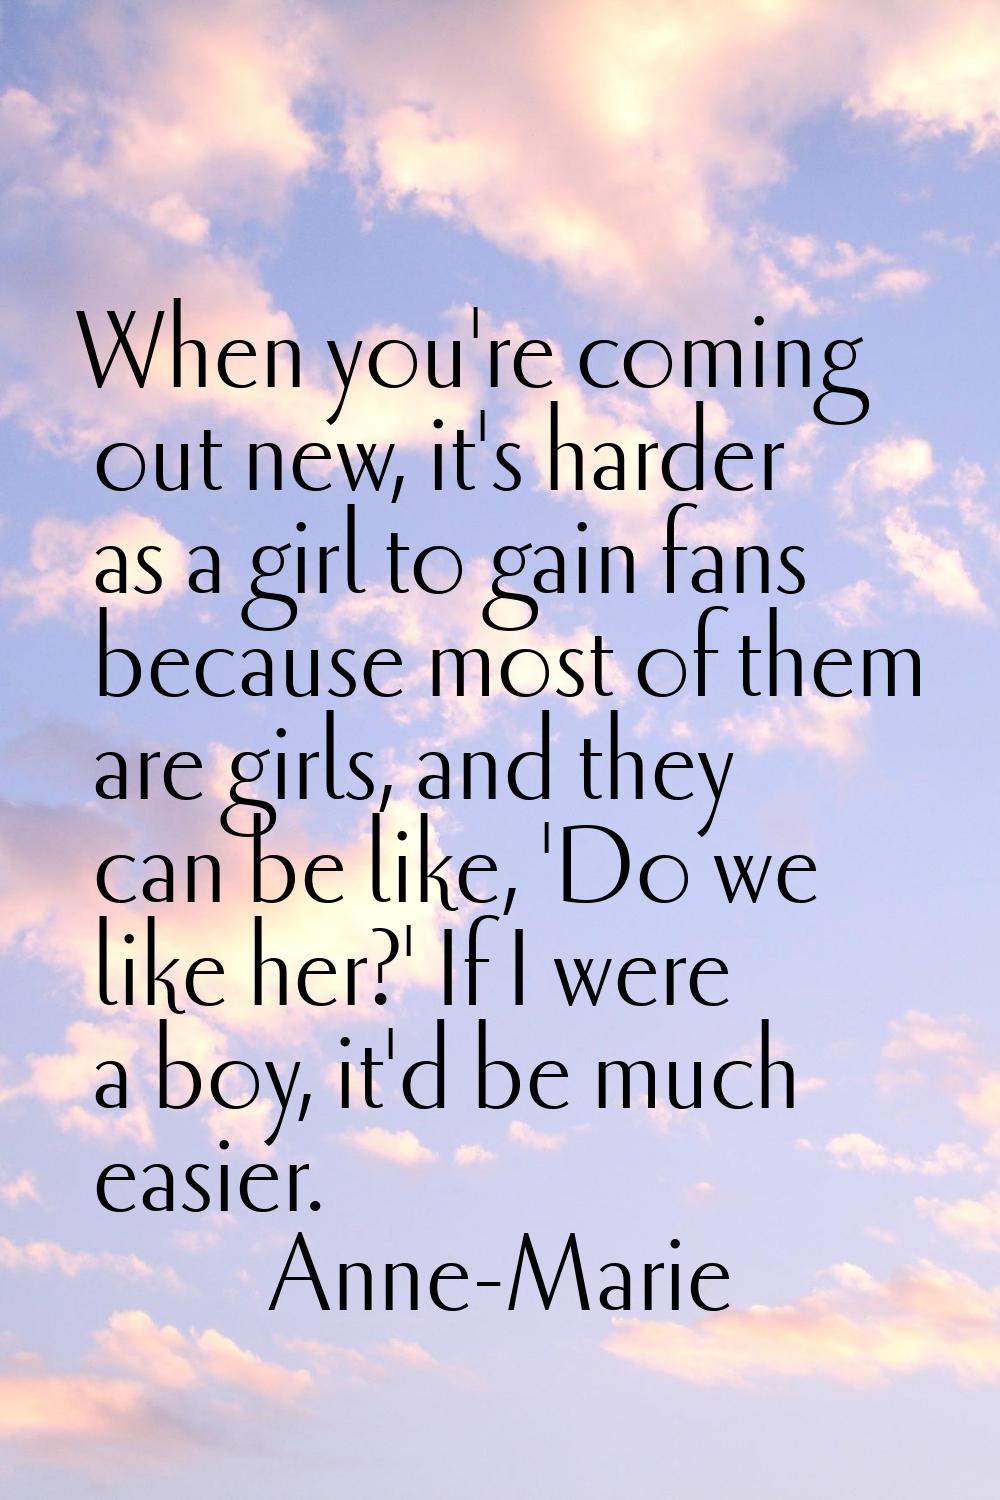 When you're coming out new, it's harder as a girl to gain fans because most of them are girls, and 